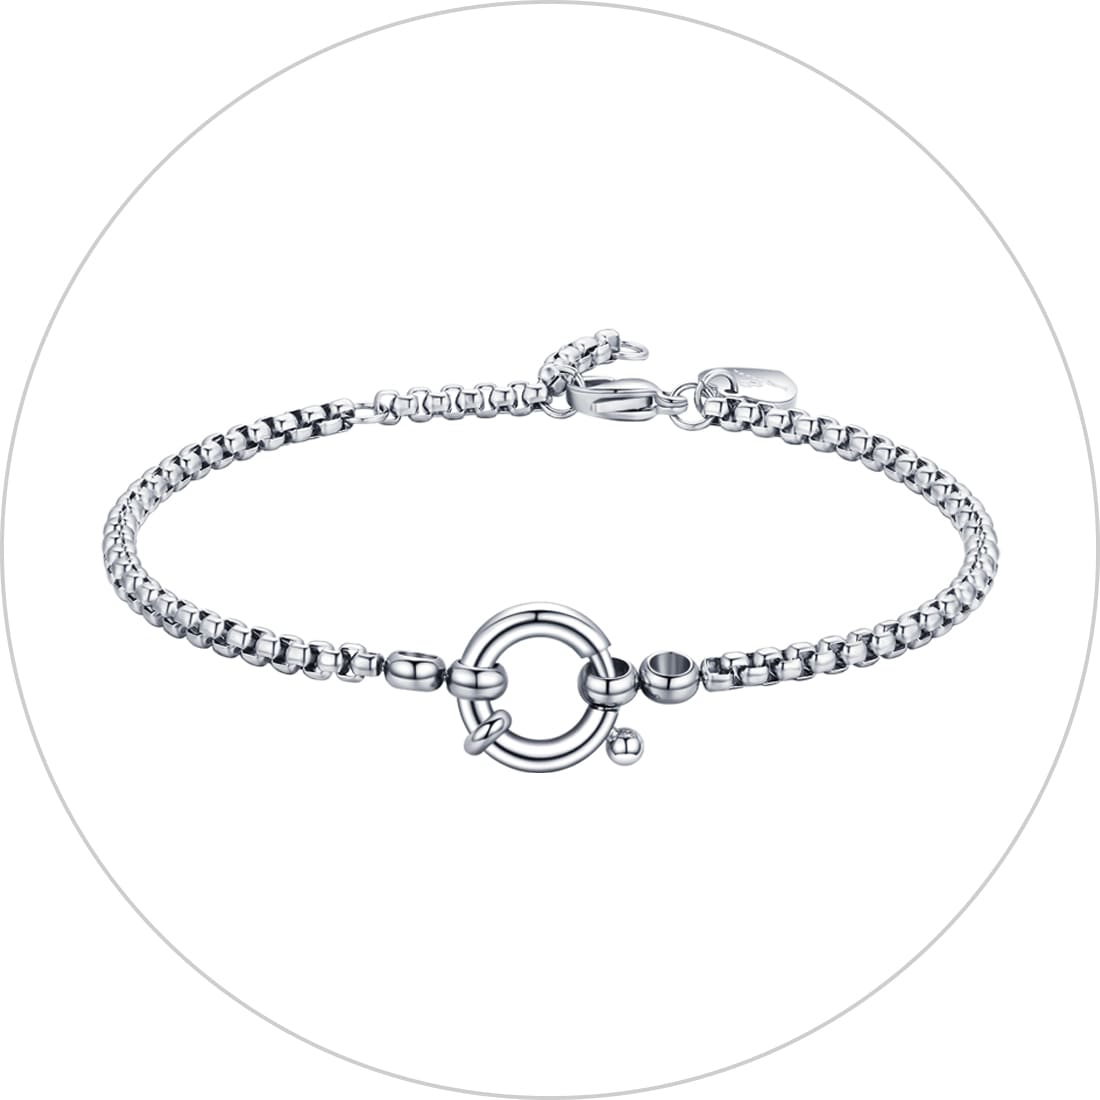 Women's bracelets: buy online at discounted prices - Luca Barra